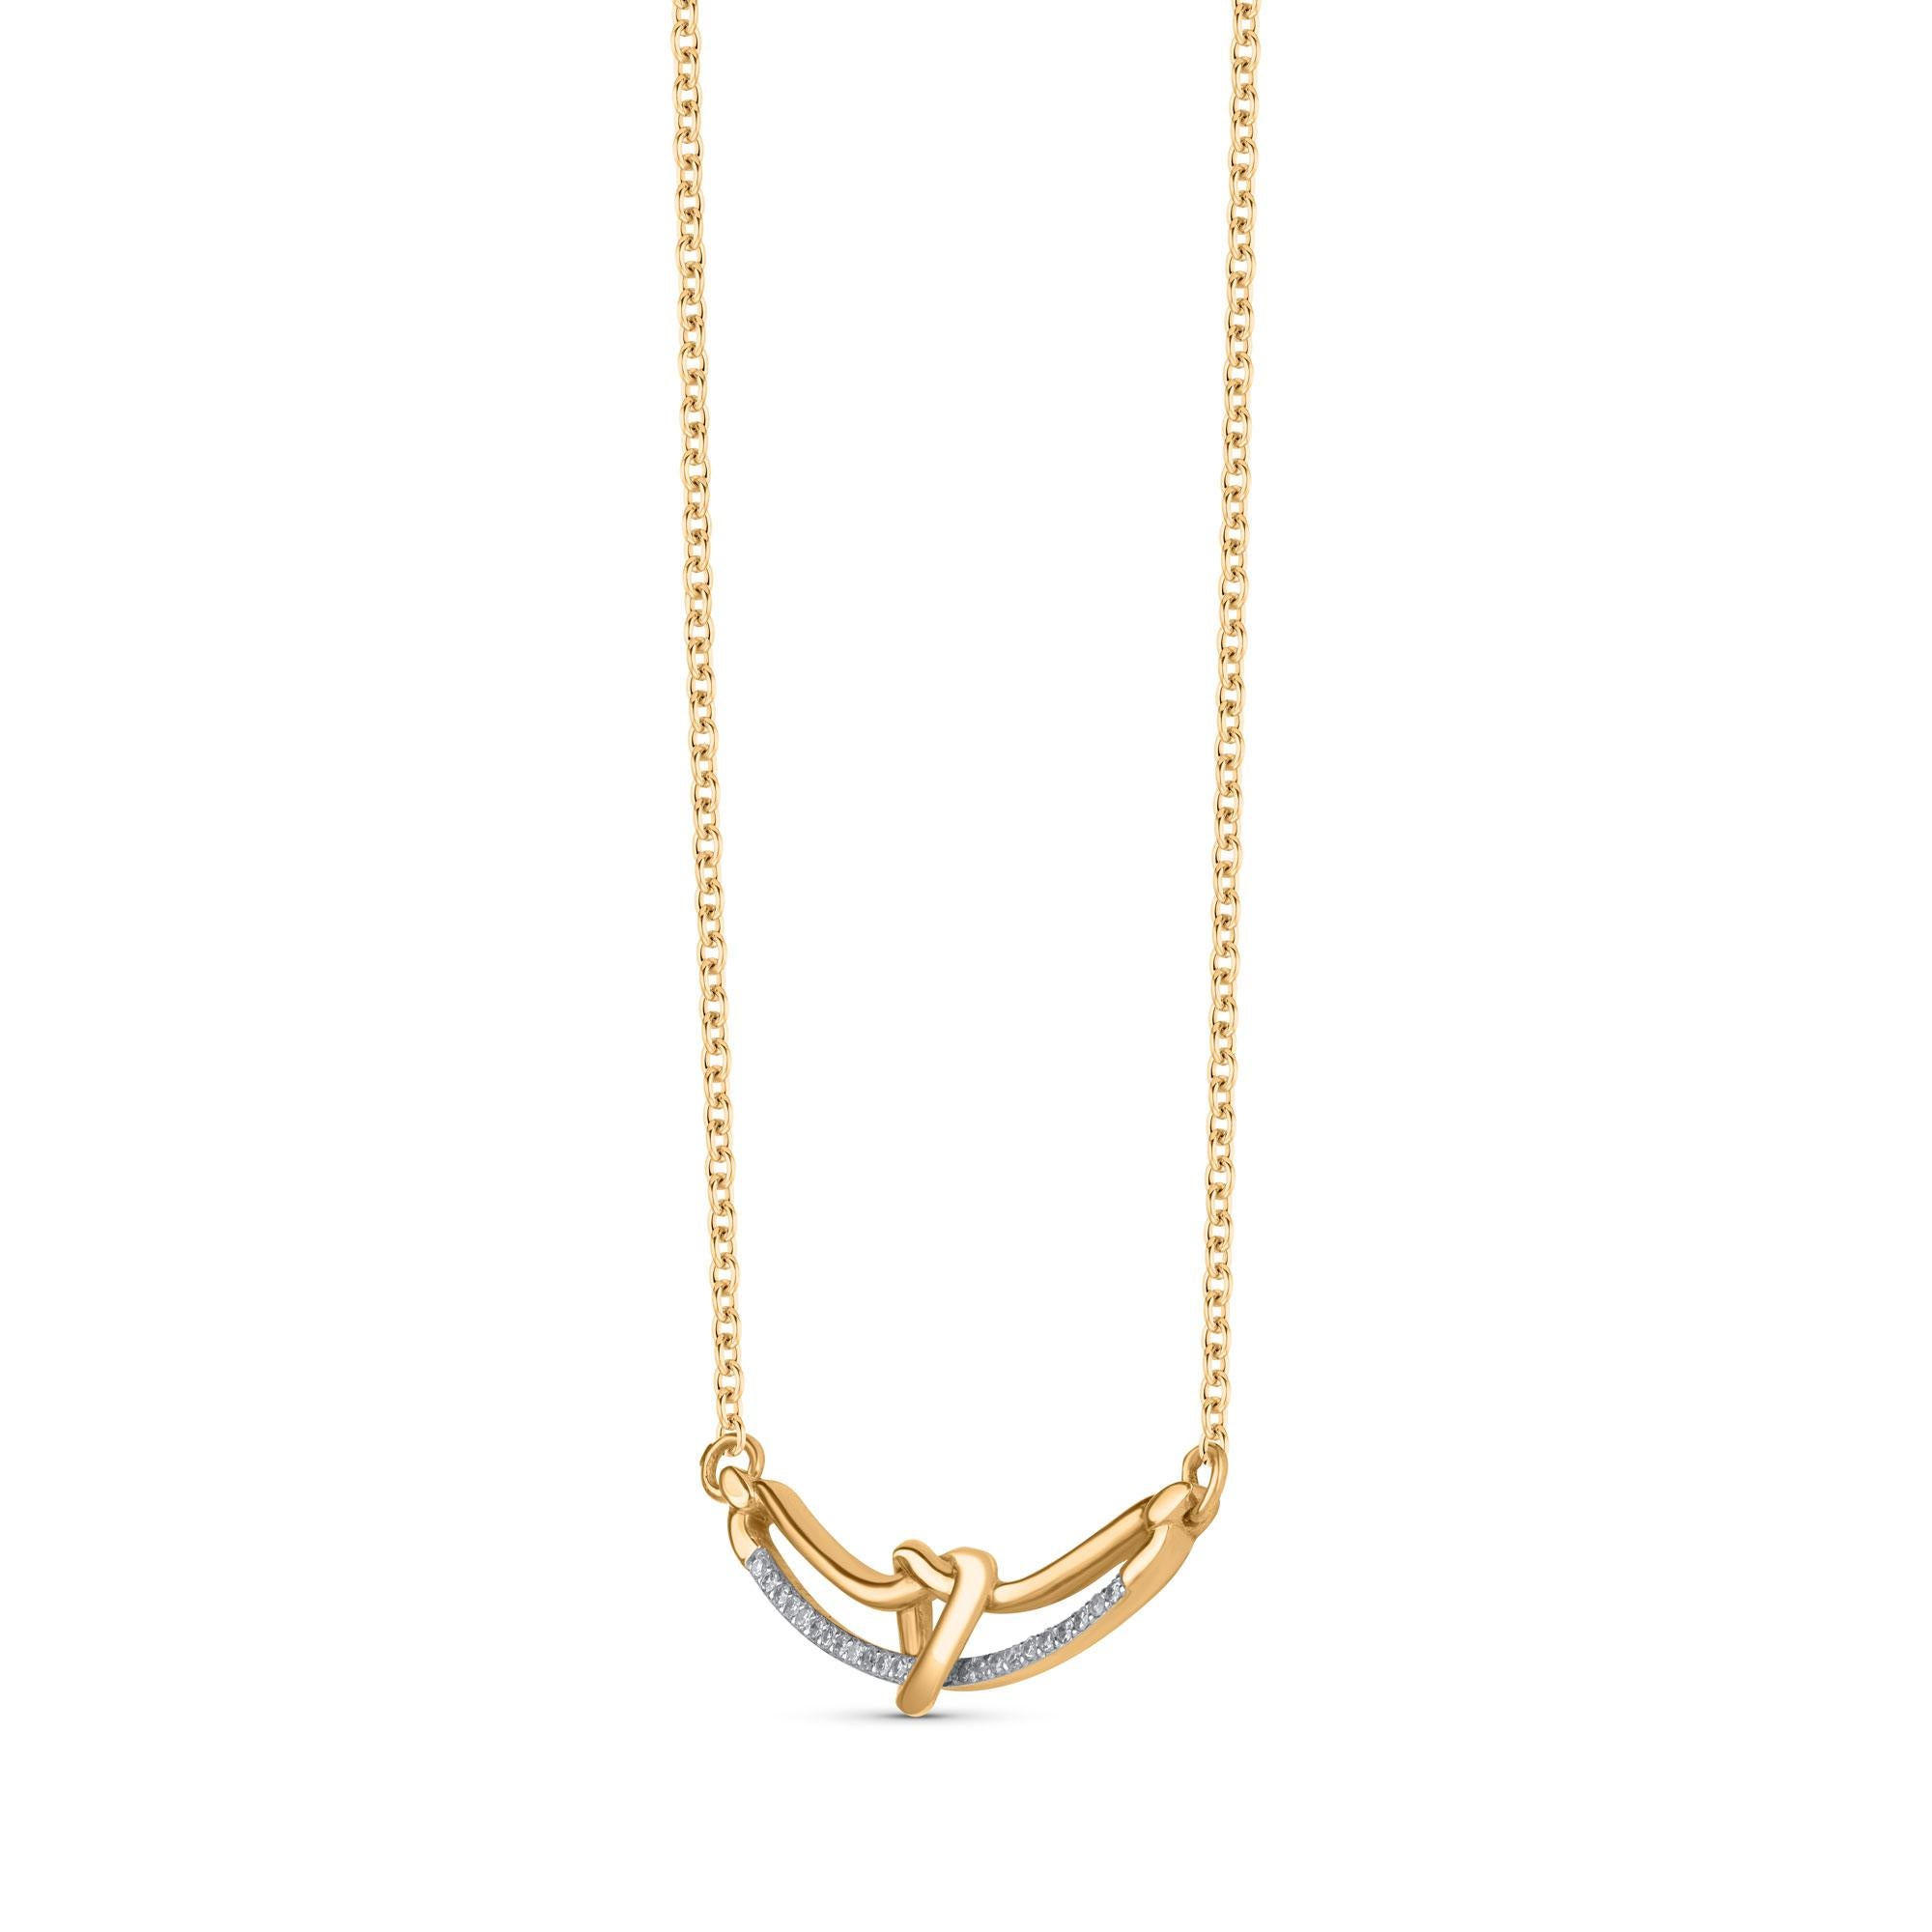 This knot heart shaped designer necklace glitters with 25 round-cut diamonds set in prong setting and handcrafted by skillful artisans in 18-karat yellow gold.  Diamonds are graded HI color, I1 clarity.  